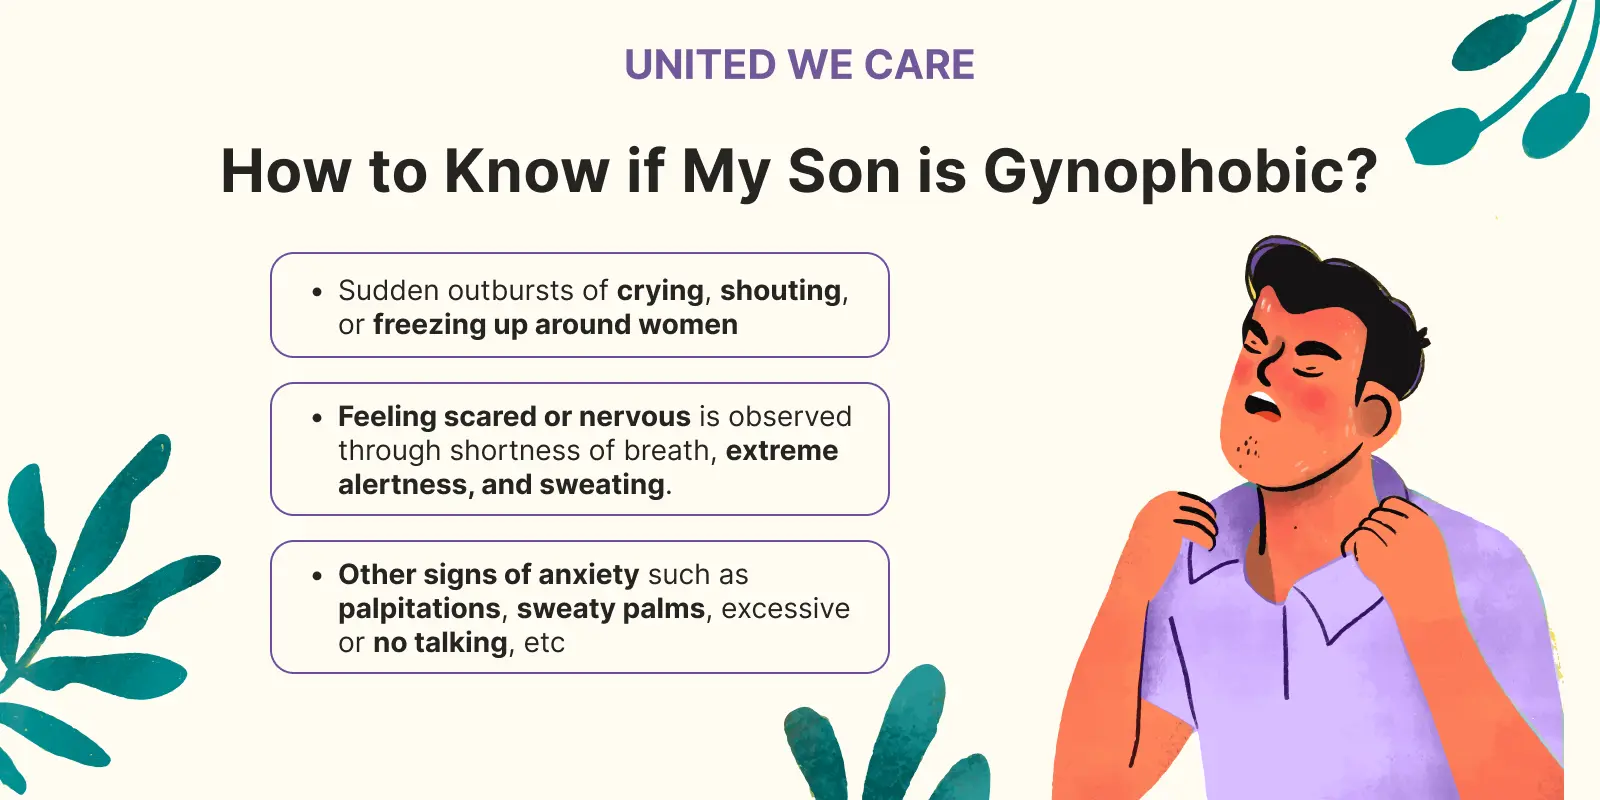 How to Know if My Son is Gynophobic?